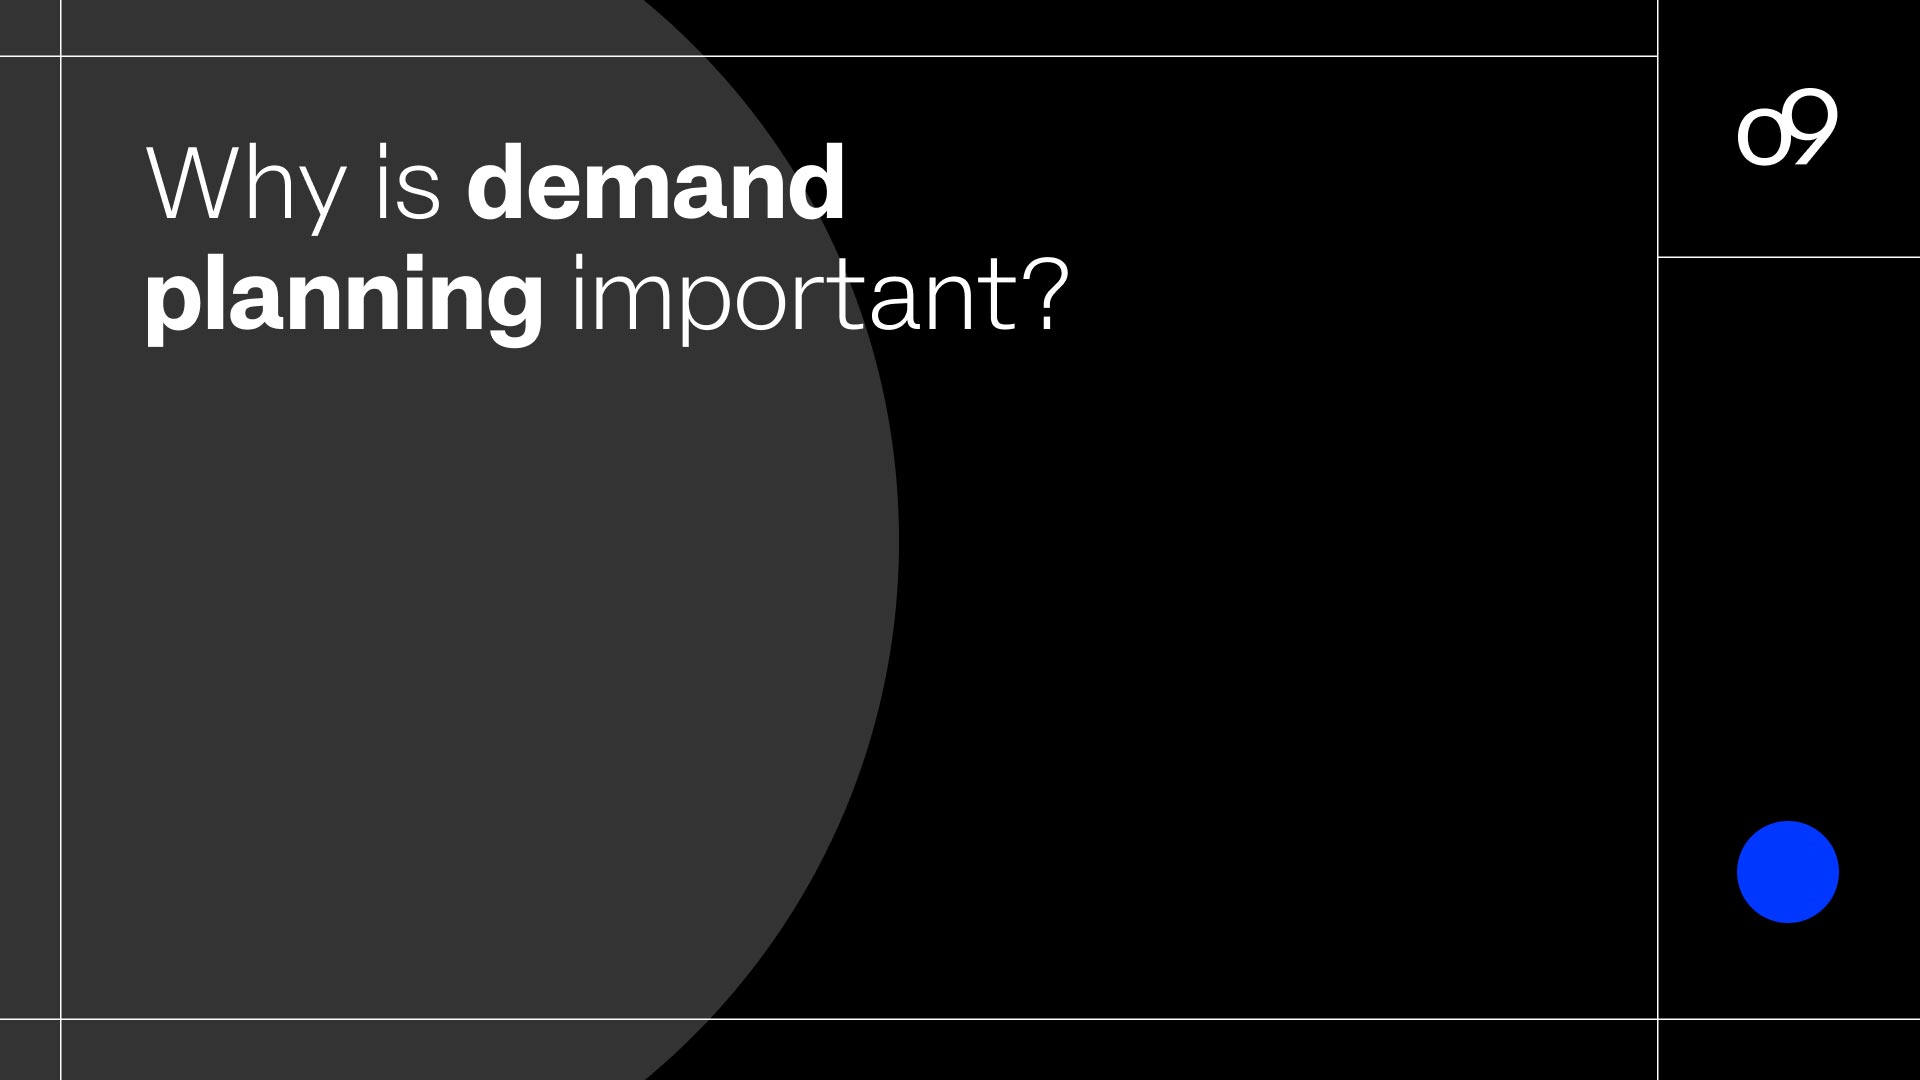 Why is demand planning important?